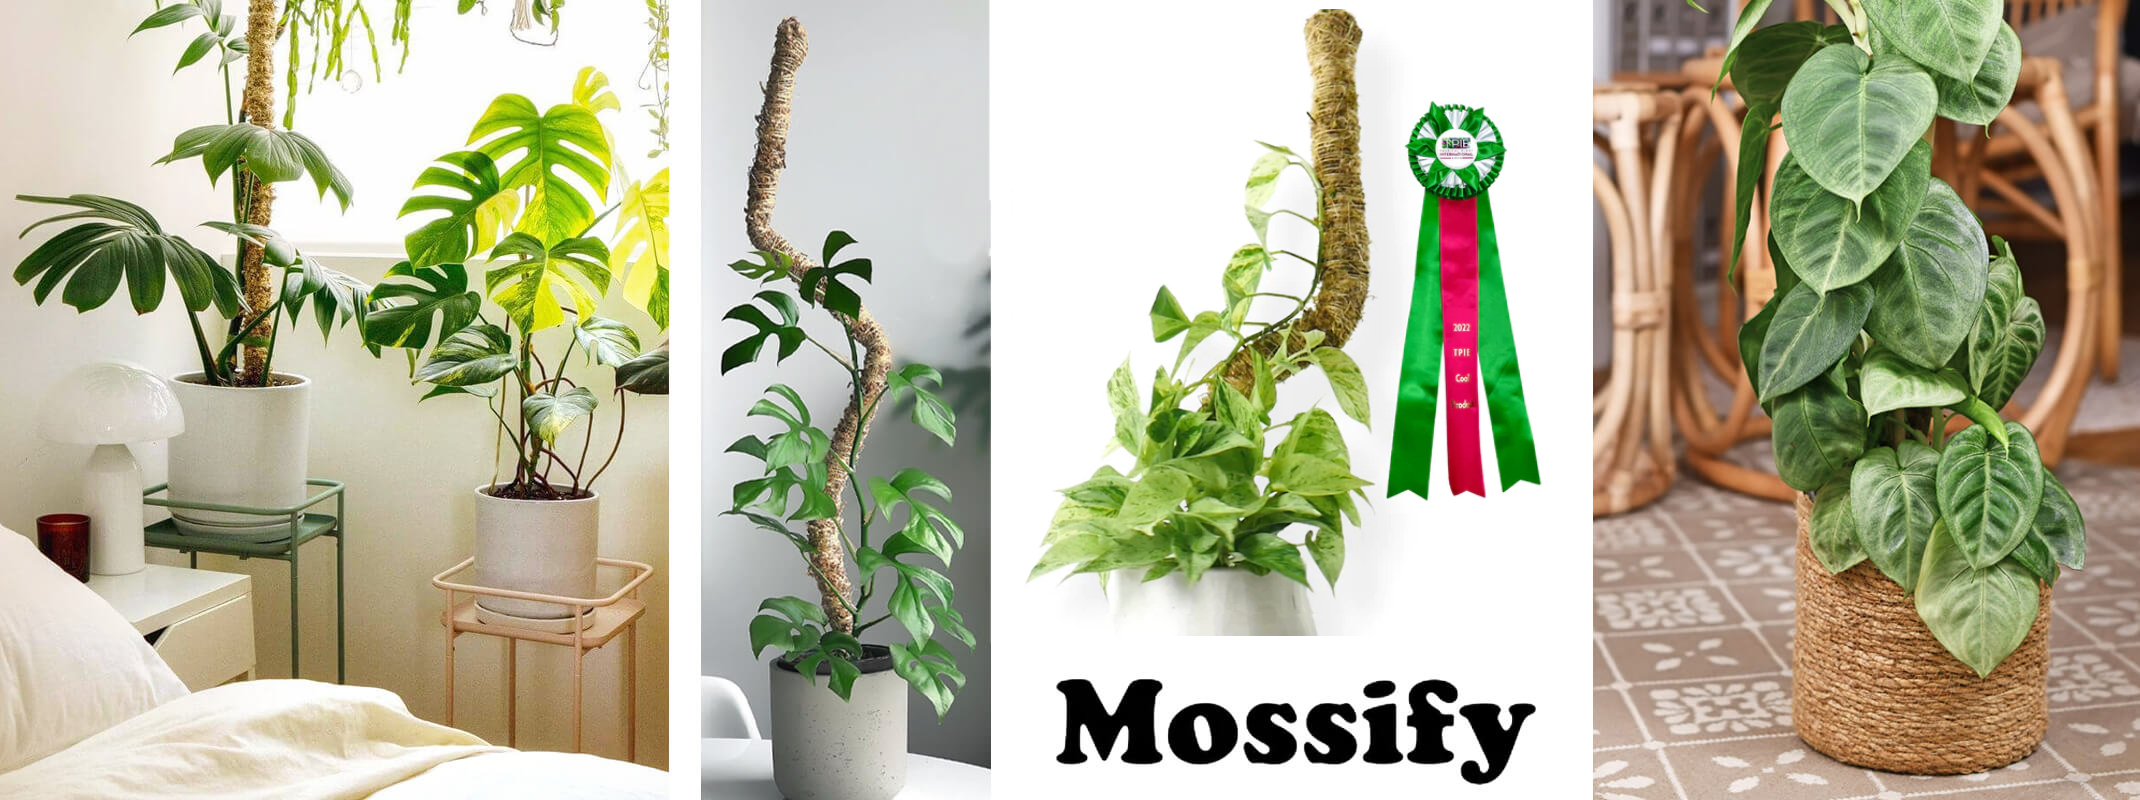 5 different houseplants growing on moss poles, the Mossify logo, and a green and red award.